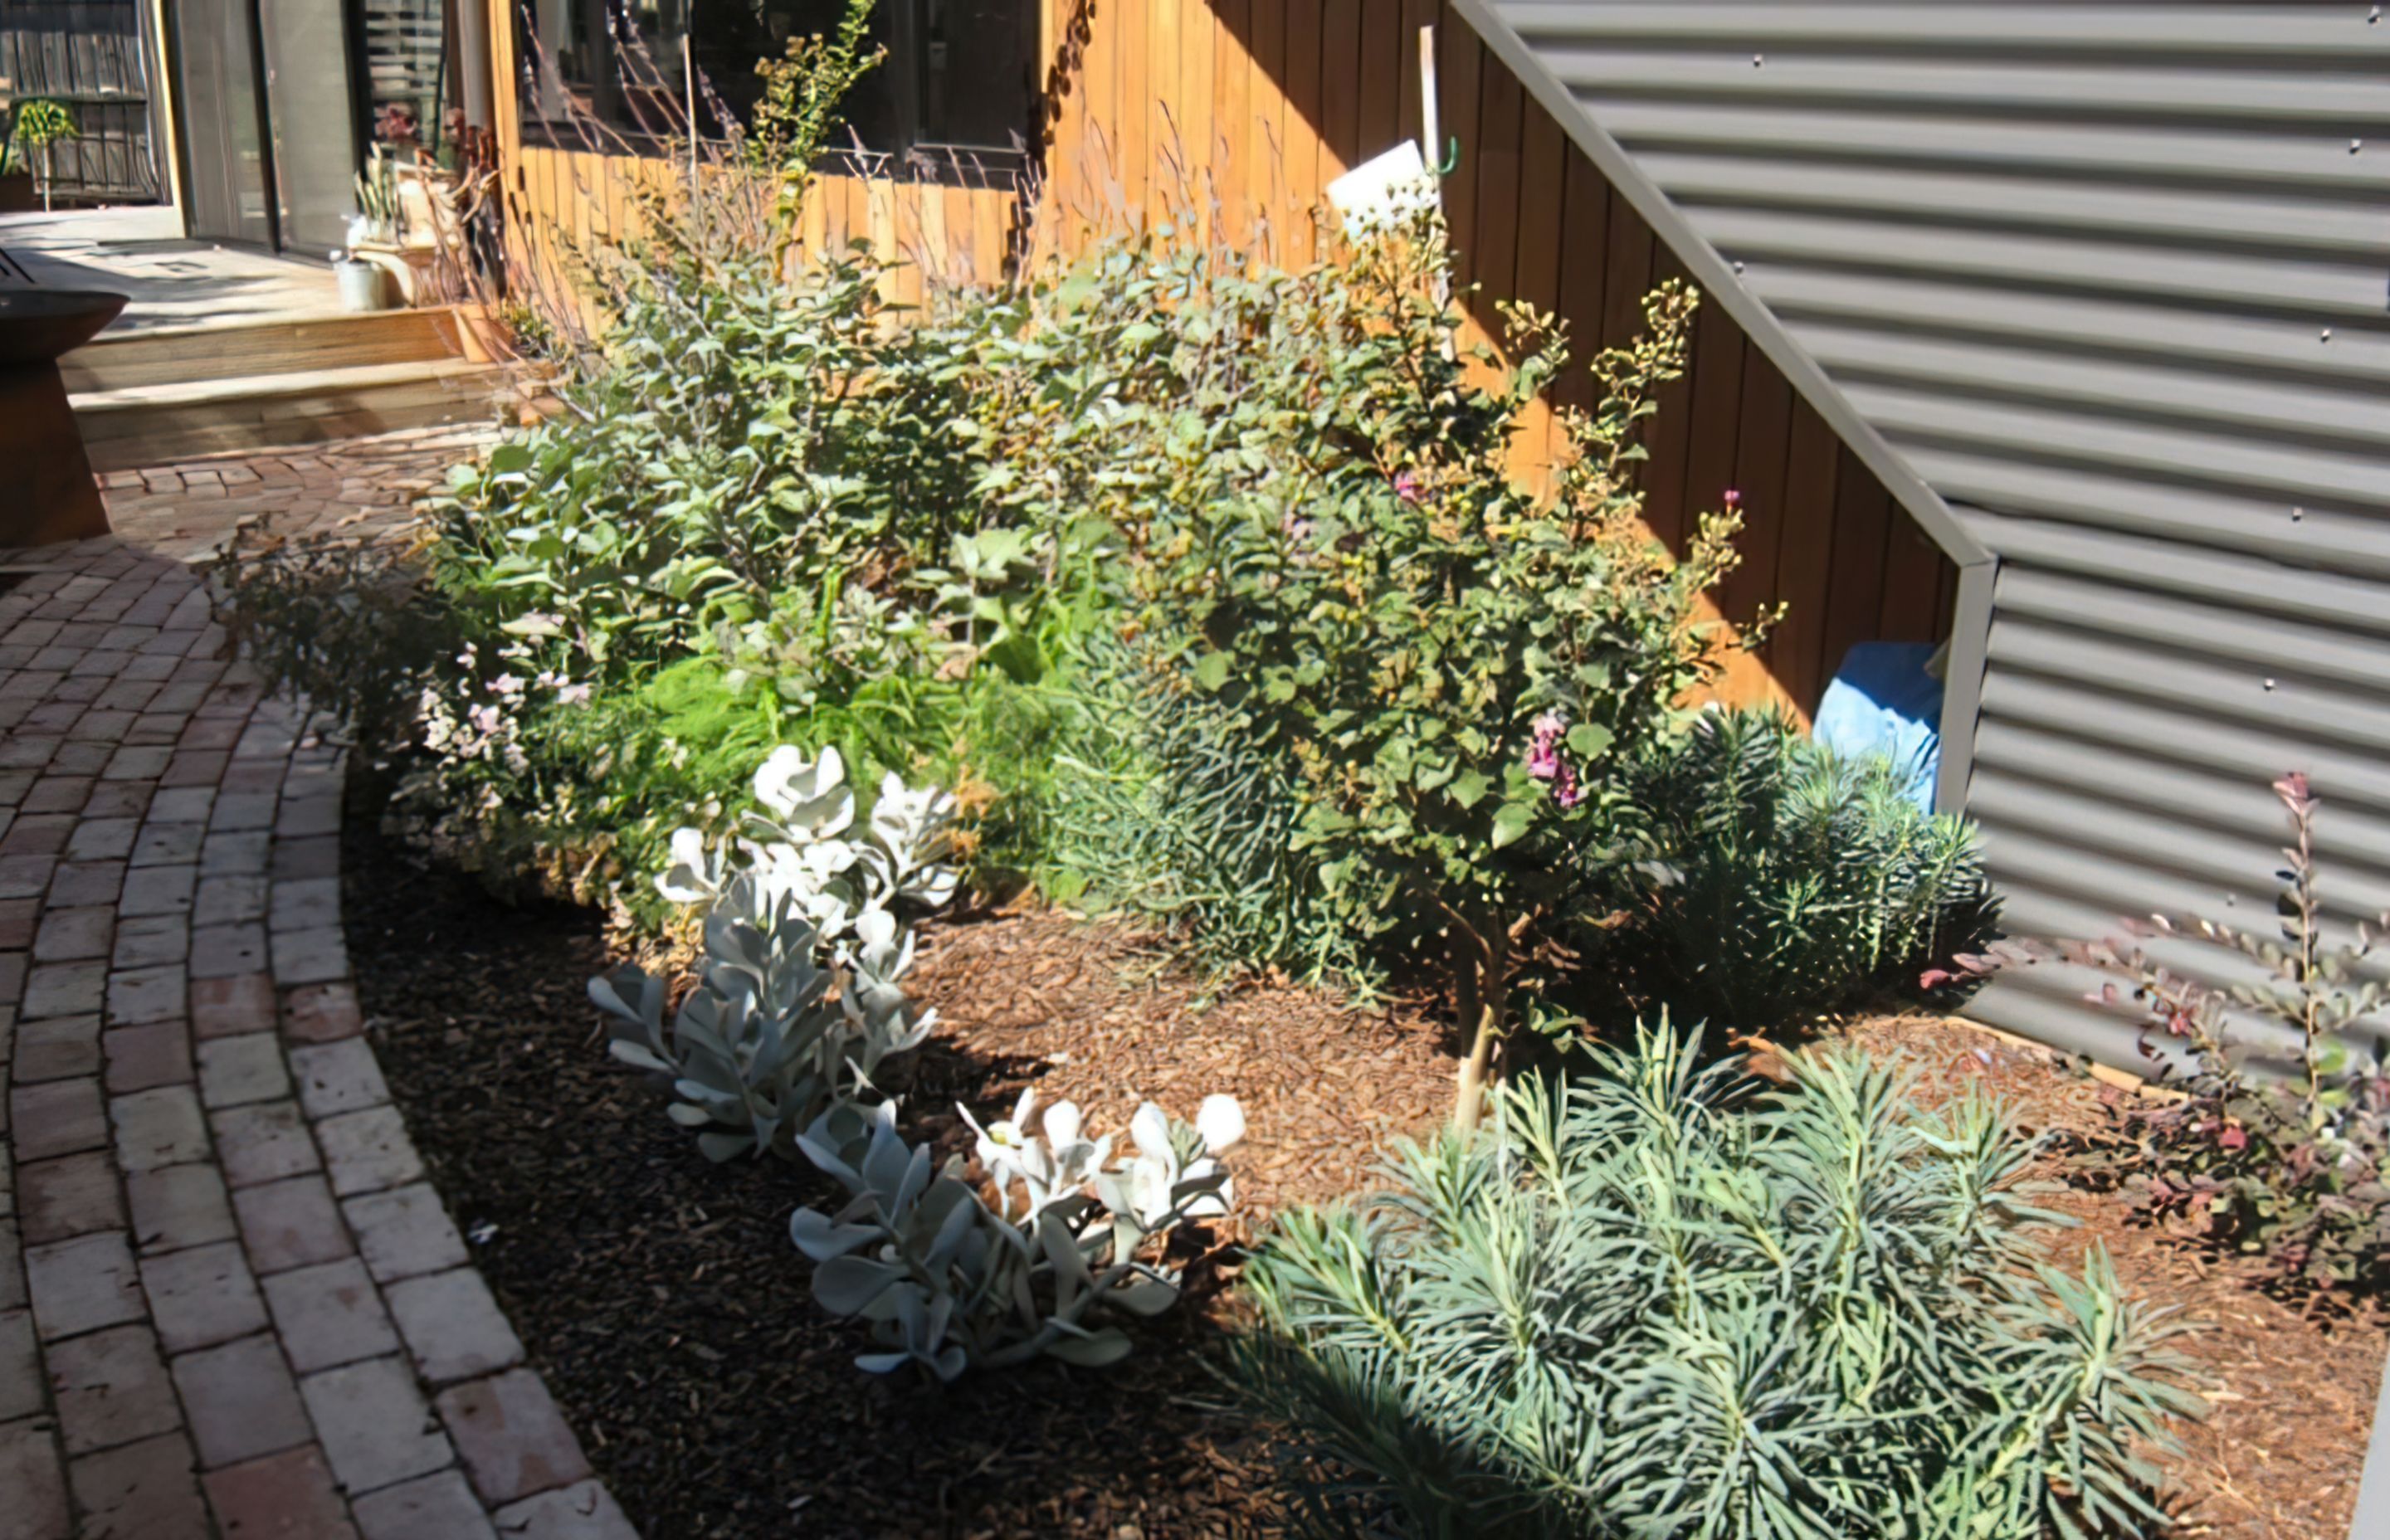 AFTER the garden design. A diversity of plantings make an an appealing display along the house to the deck